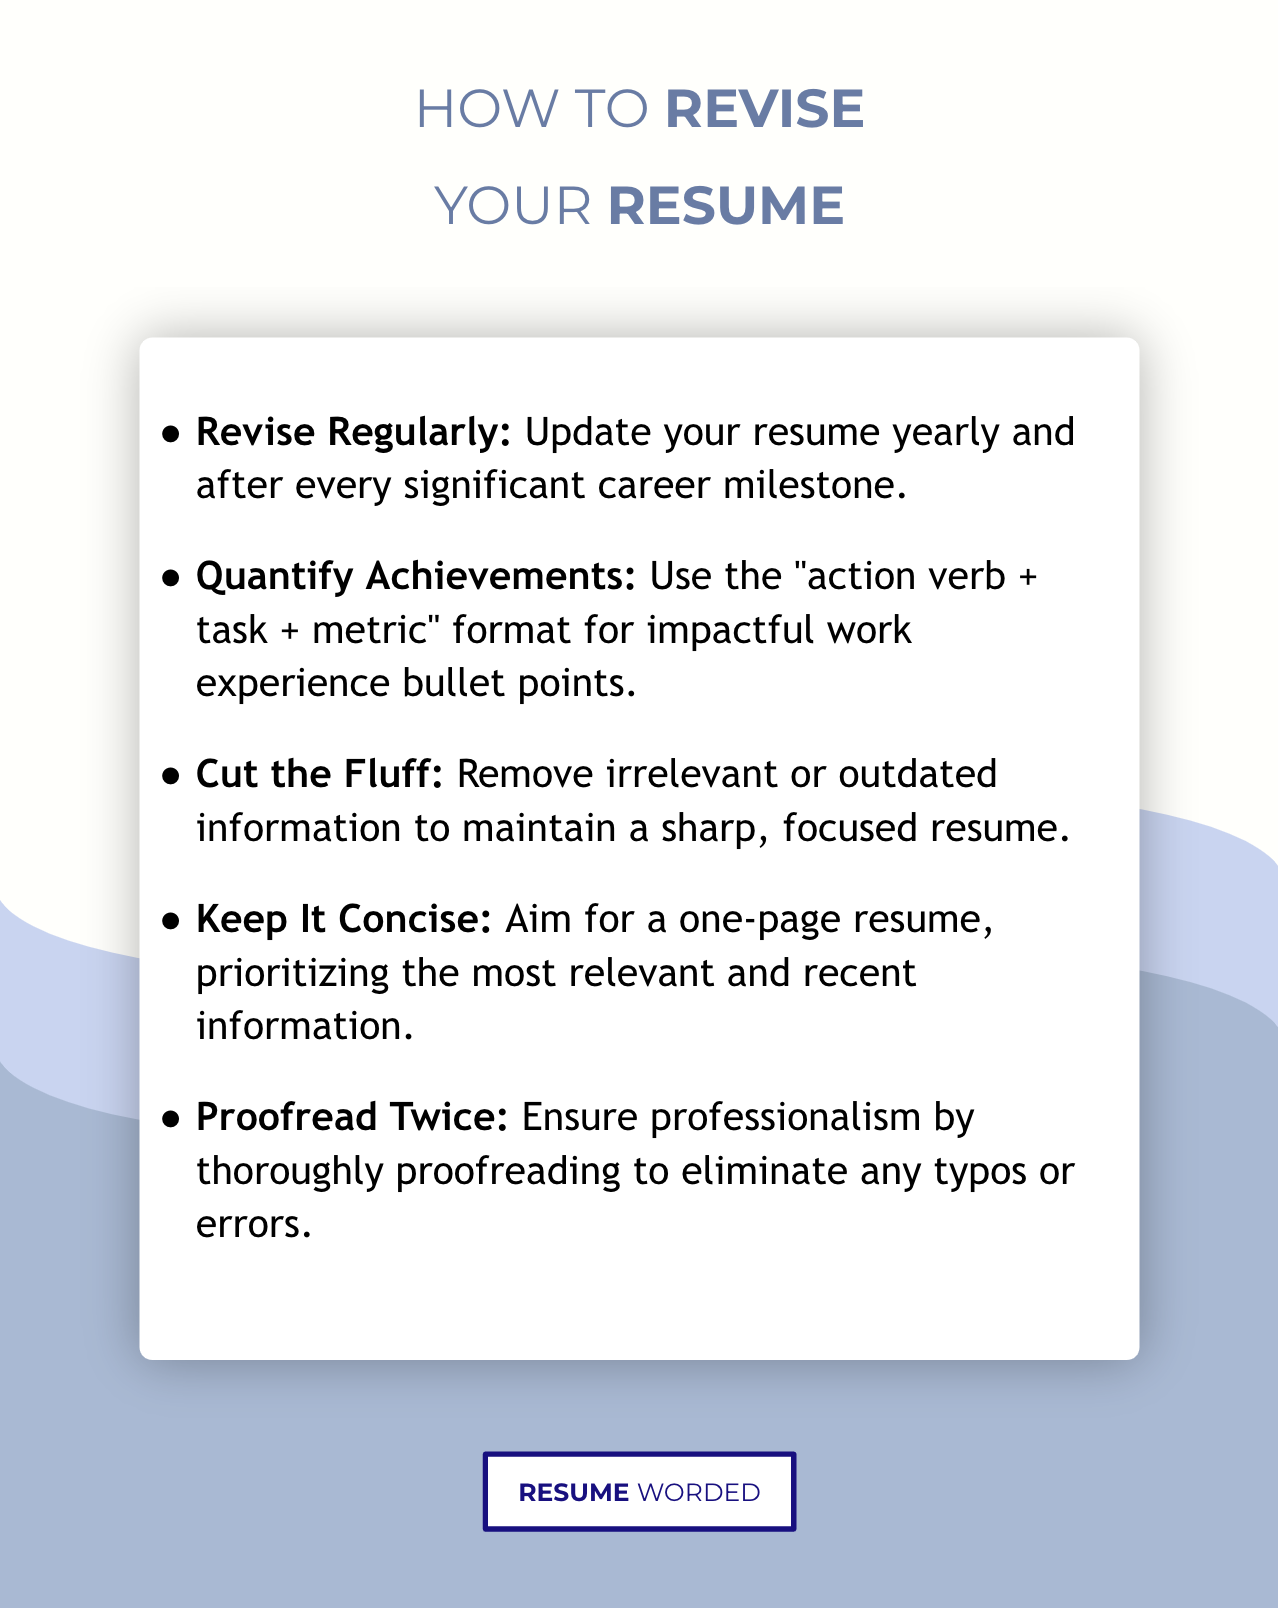 Key tips to keep in mind when revising your resume